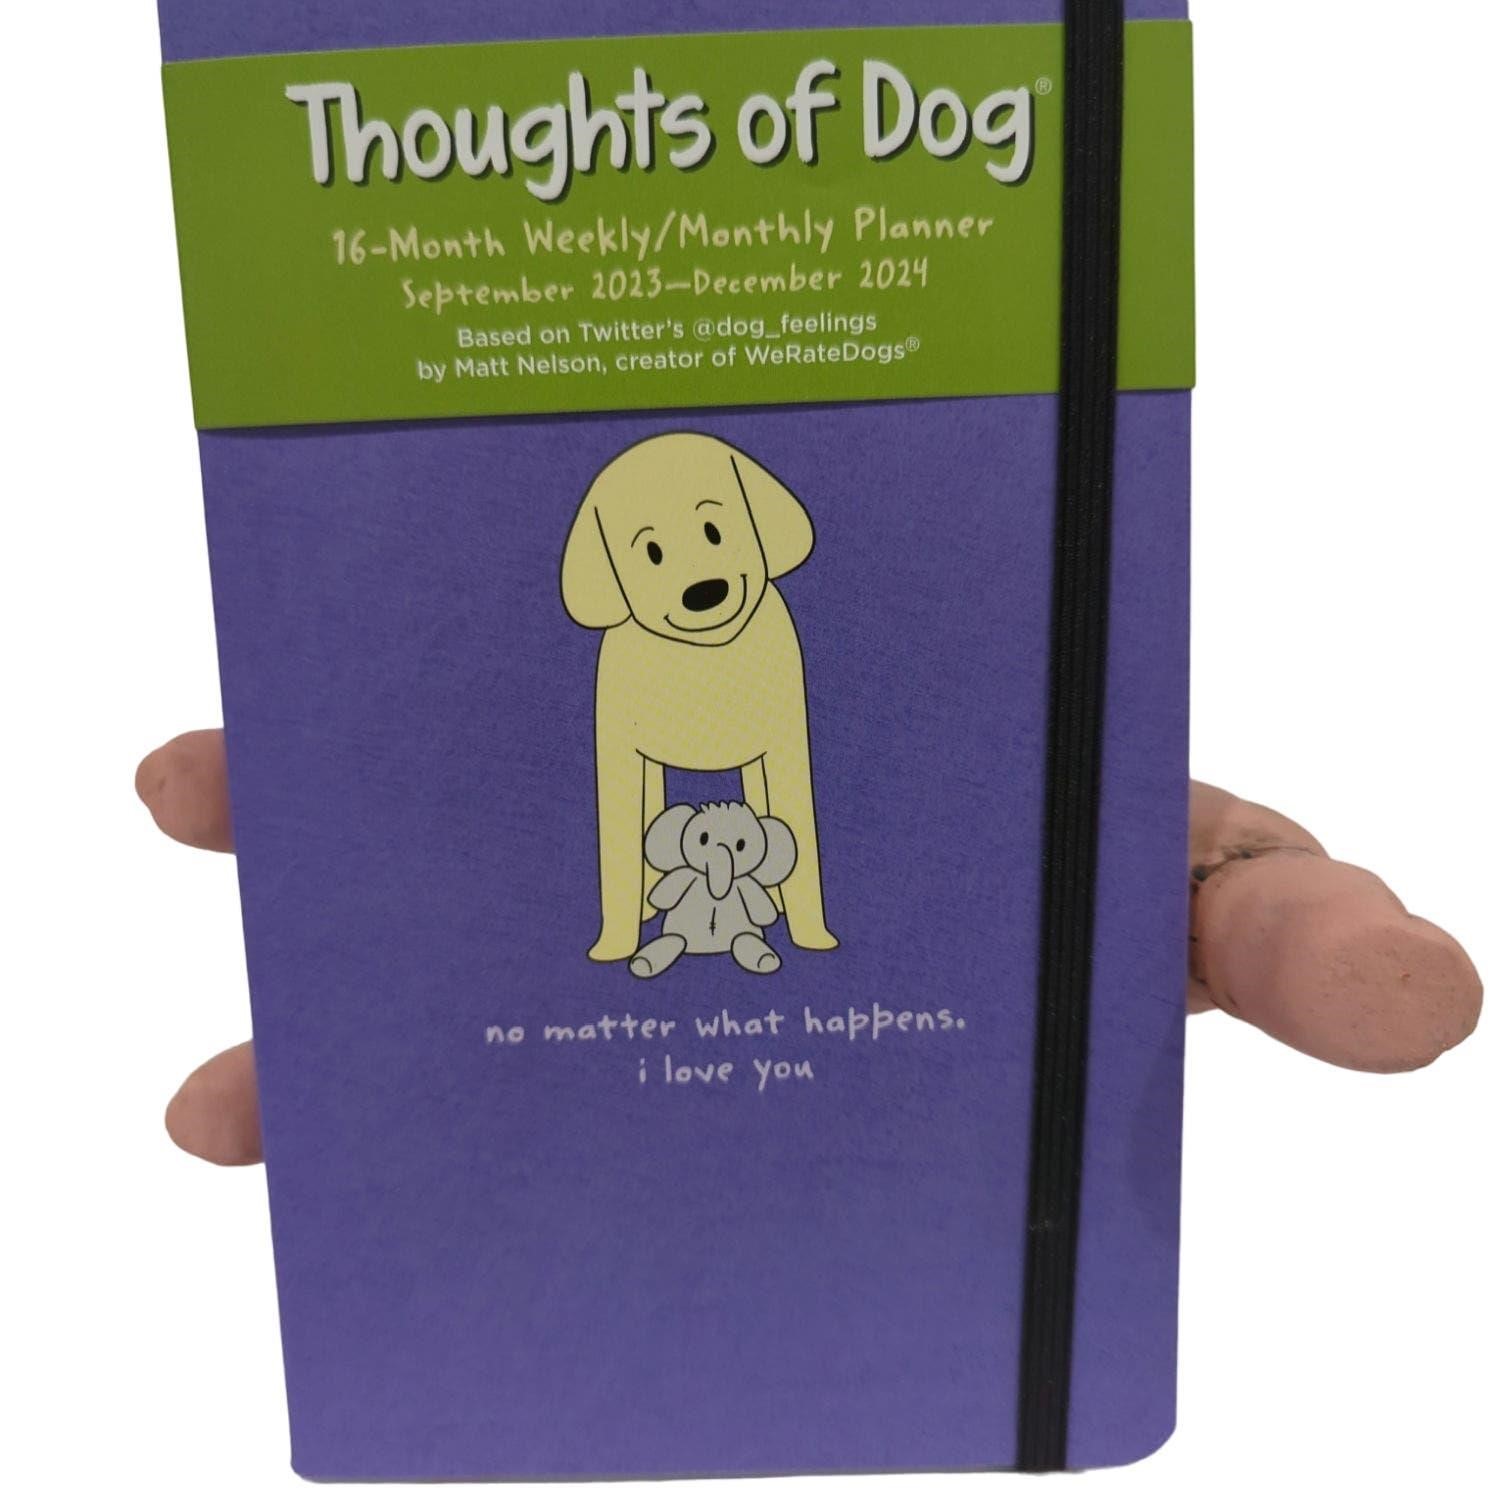 Thoughts of dog 16 month weekly planner